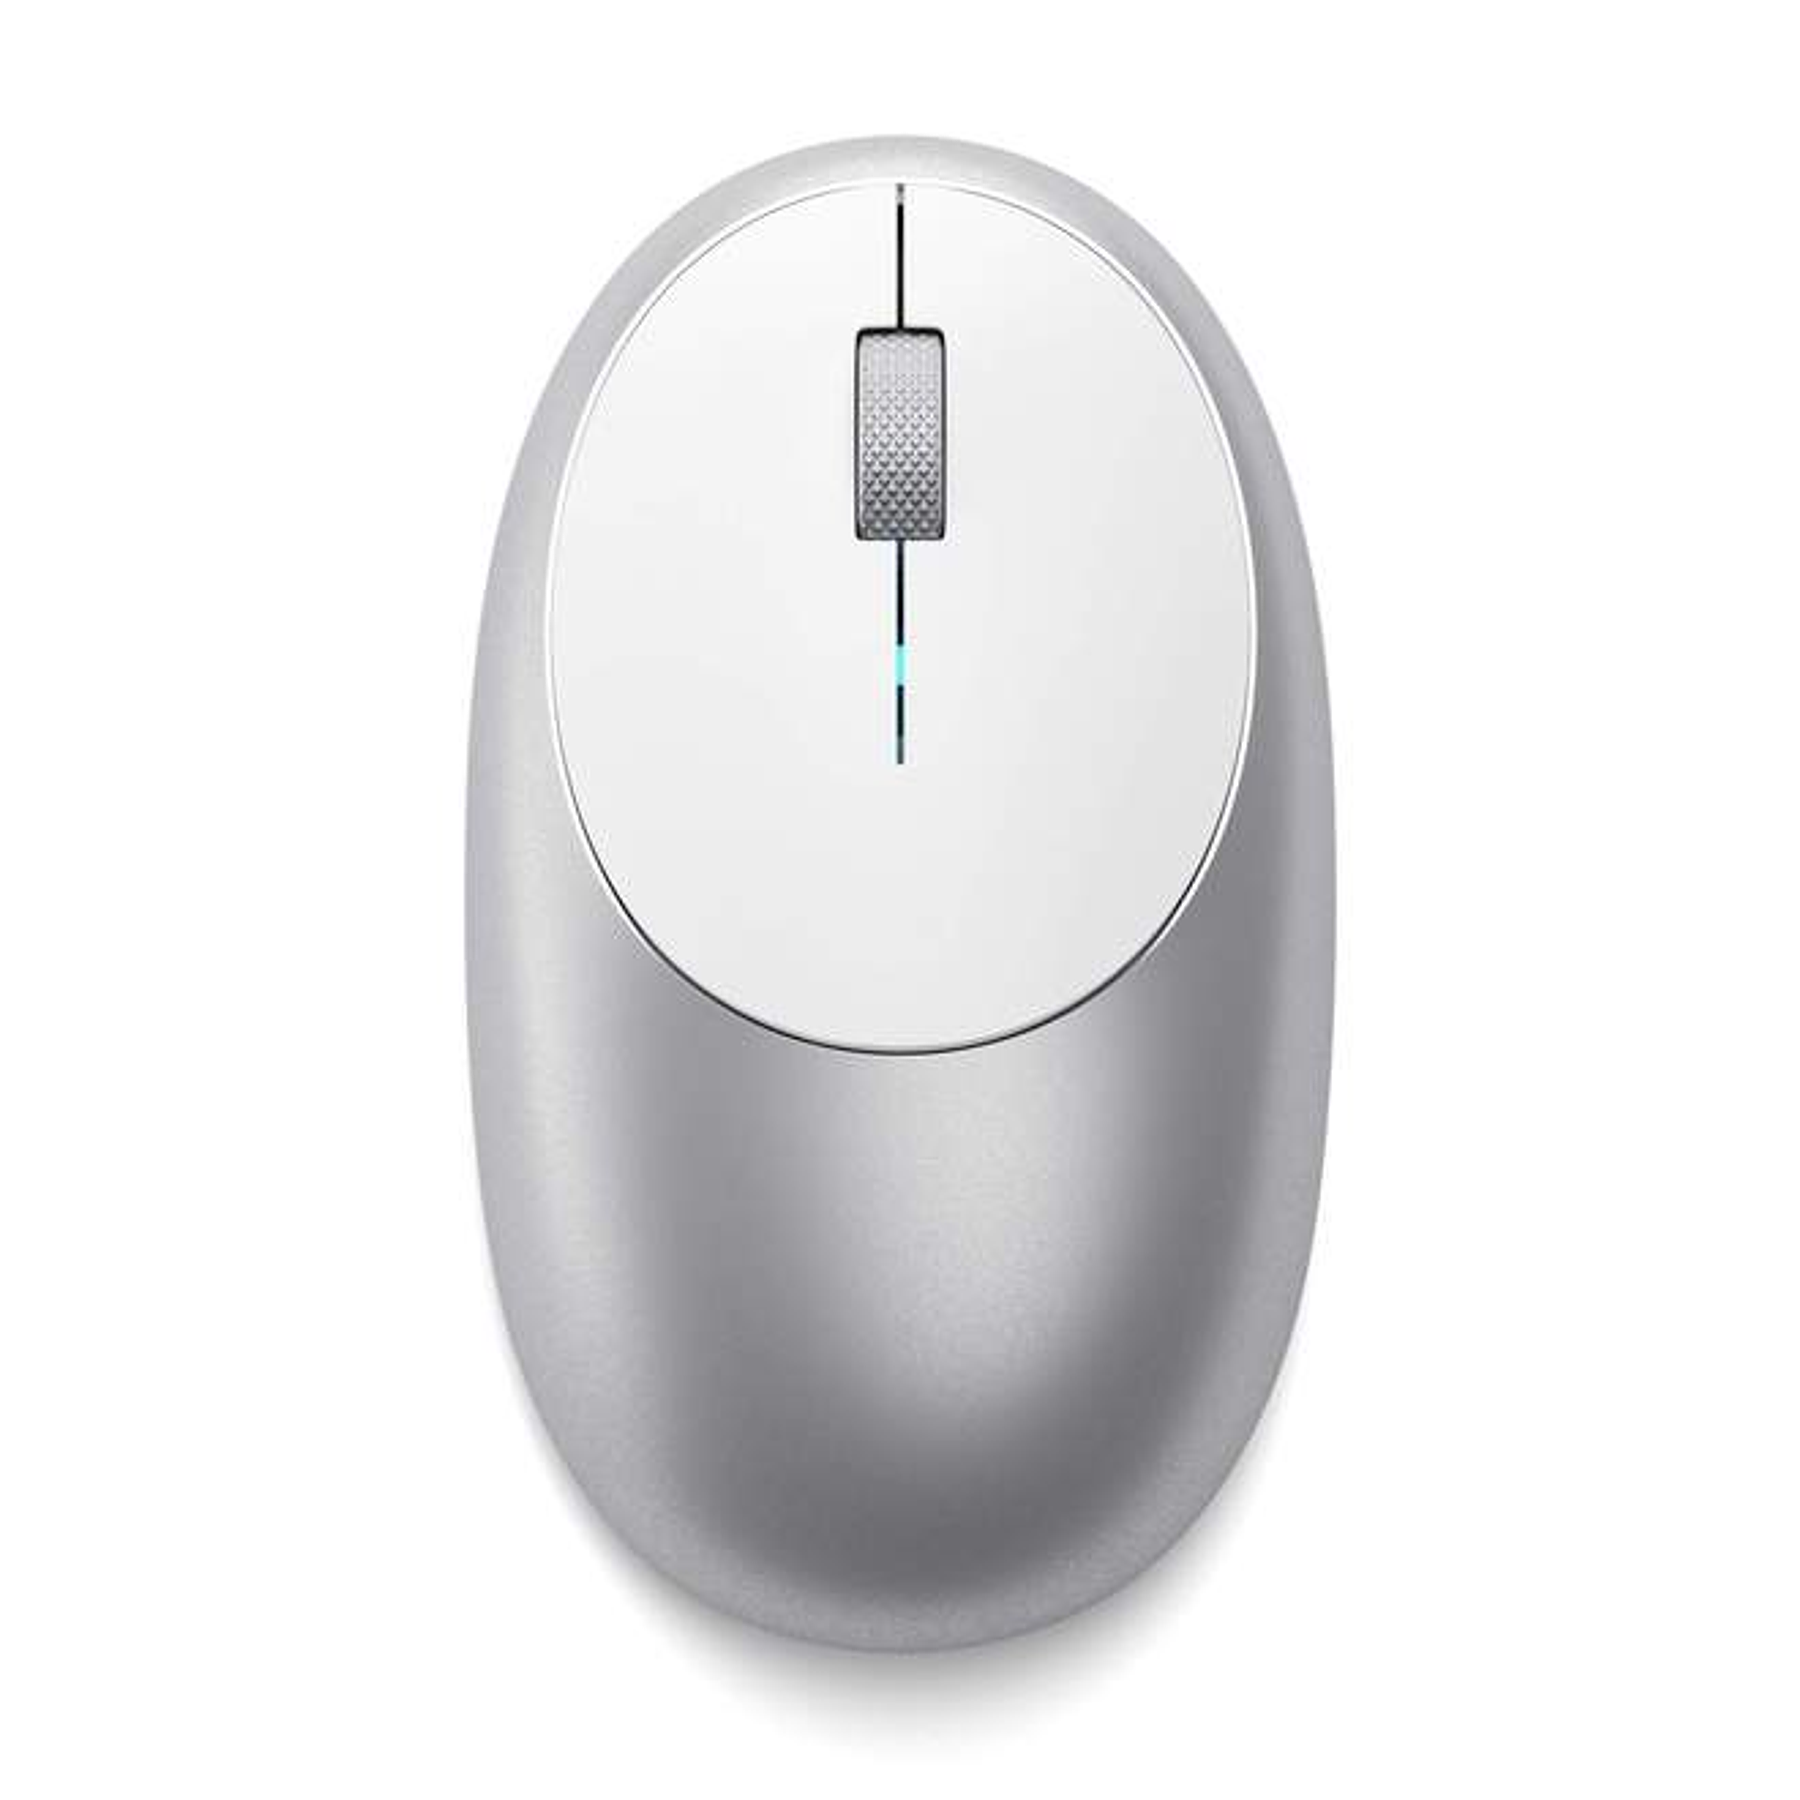 Satechi - M1 Wireless Mouse (silver)